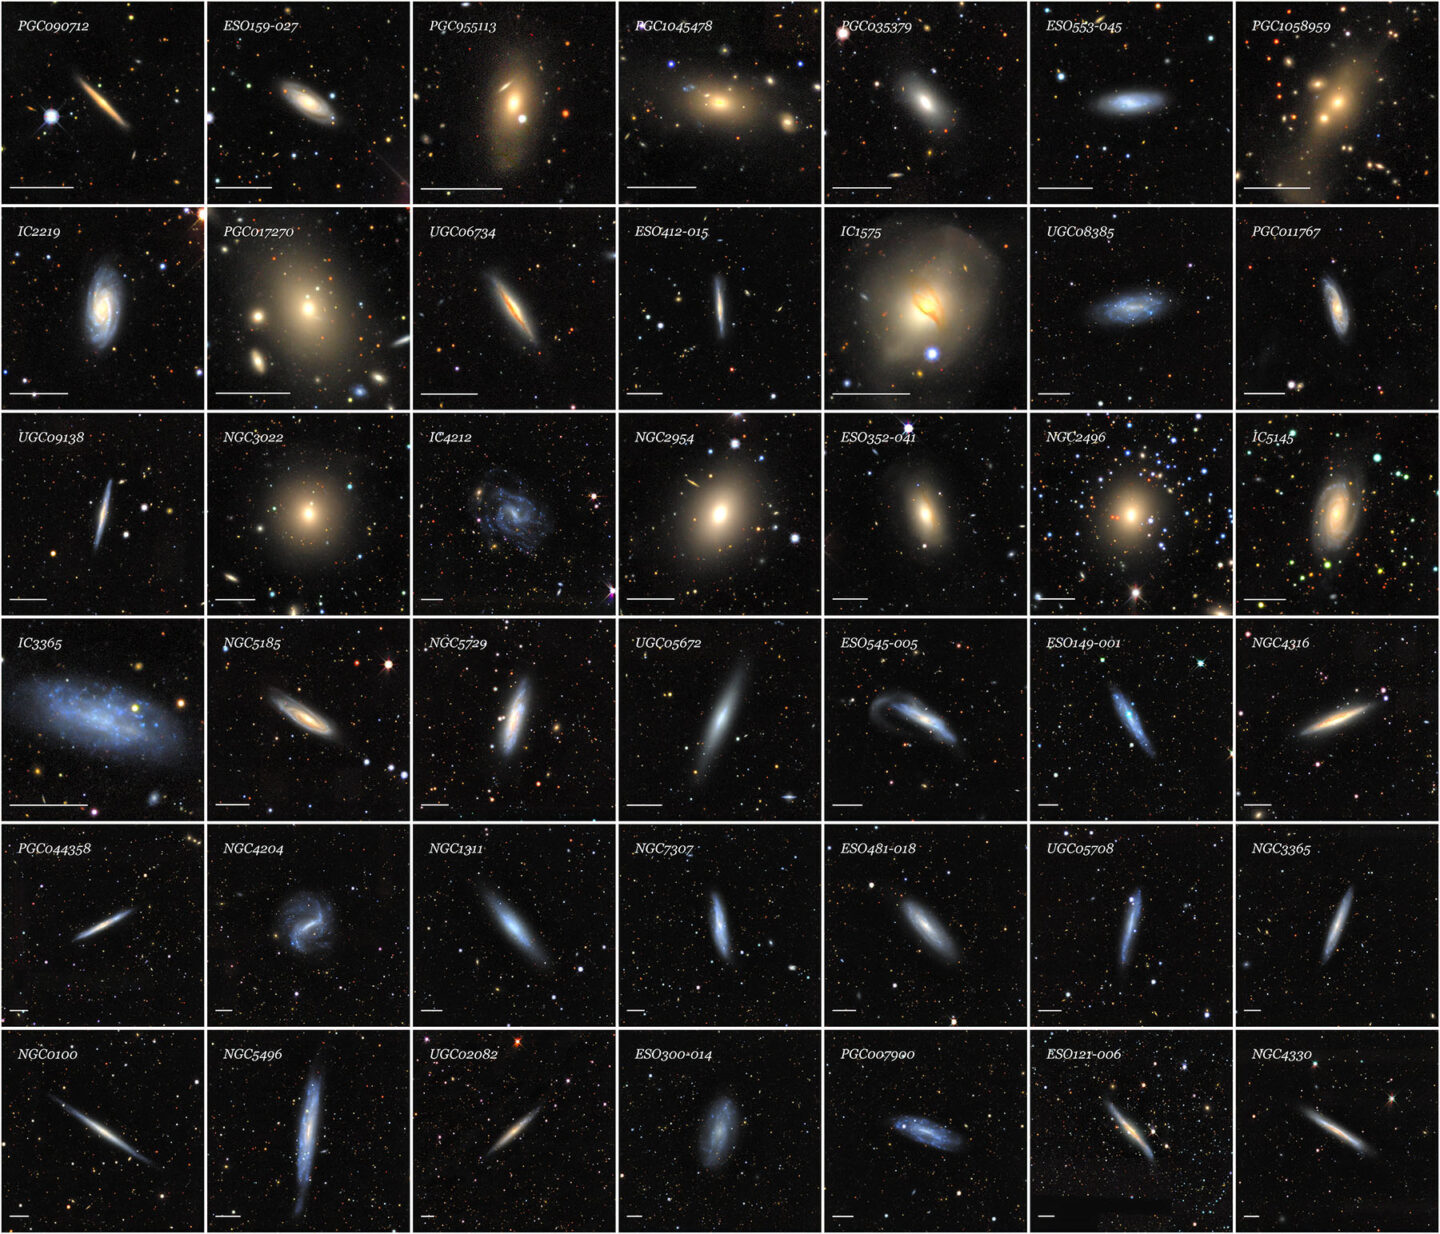 A selection of 42 galaxies from the Siena Galaxy Atlas arranged in a 6x7 chart.